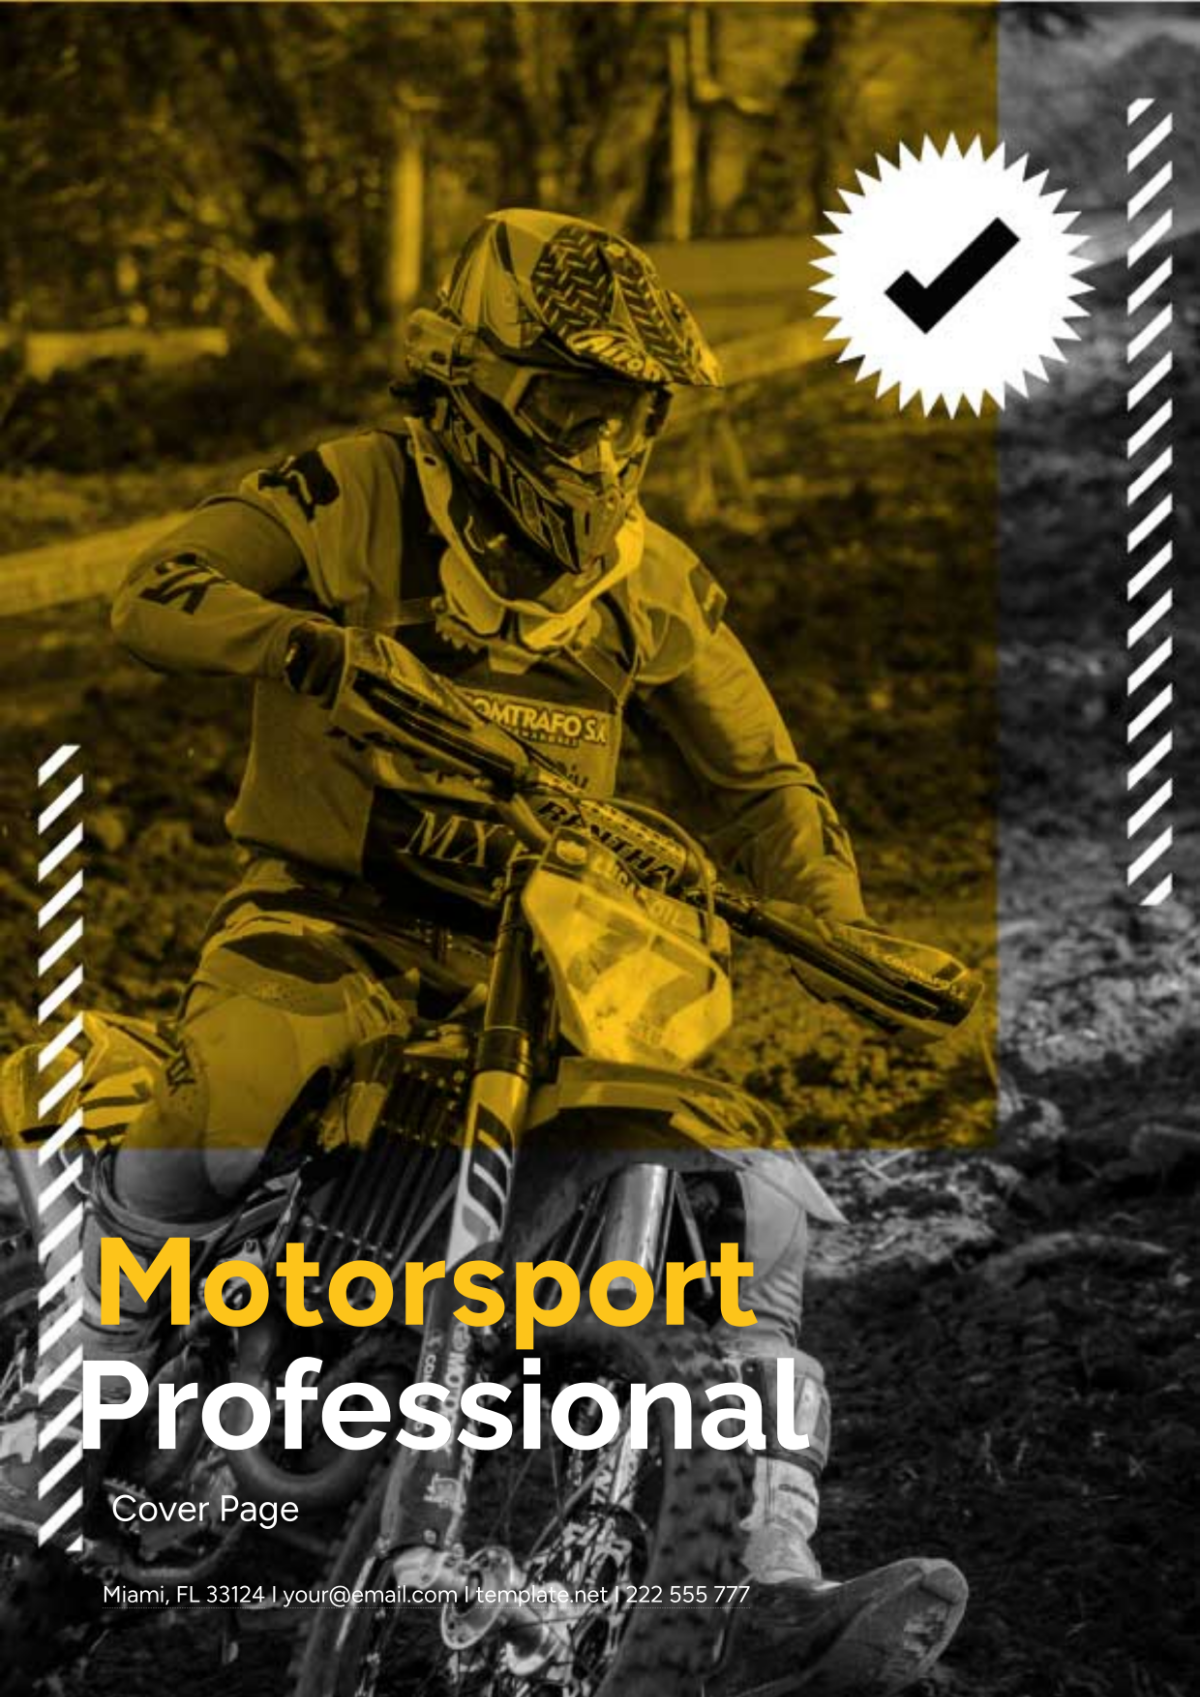 Free Motorsport Professional Cover Page Template